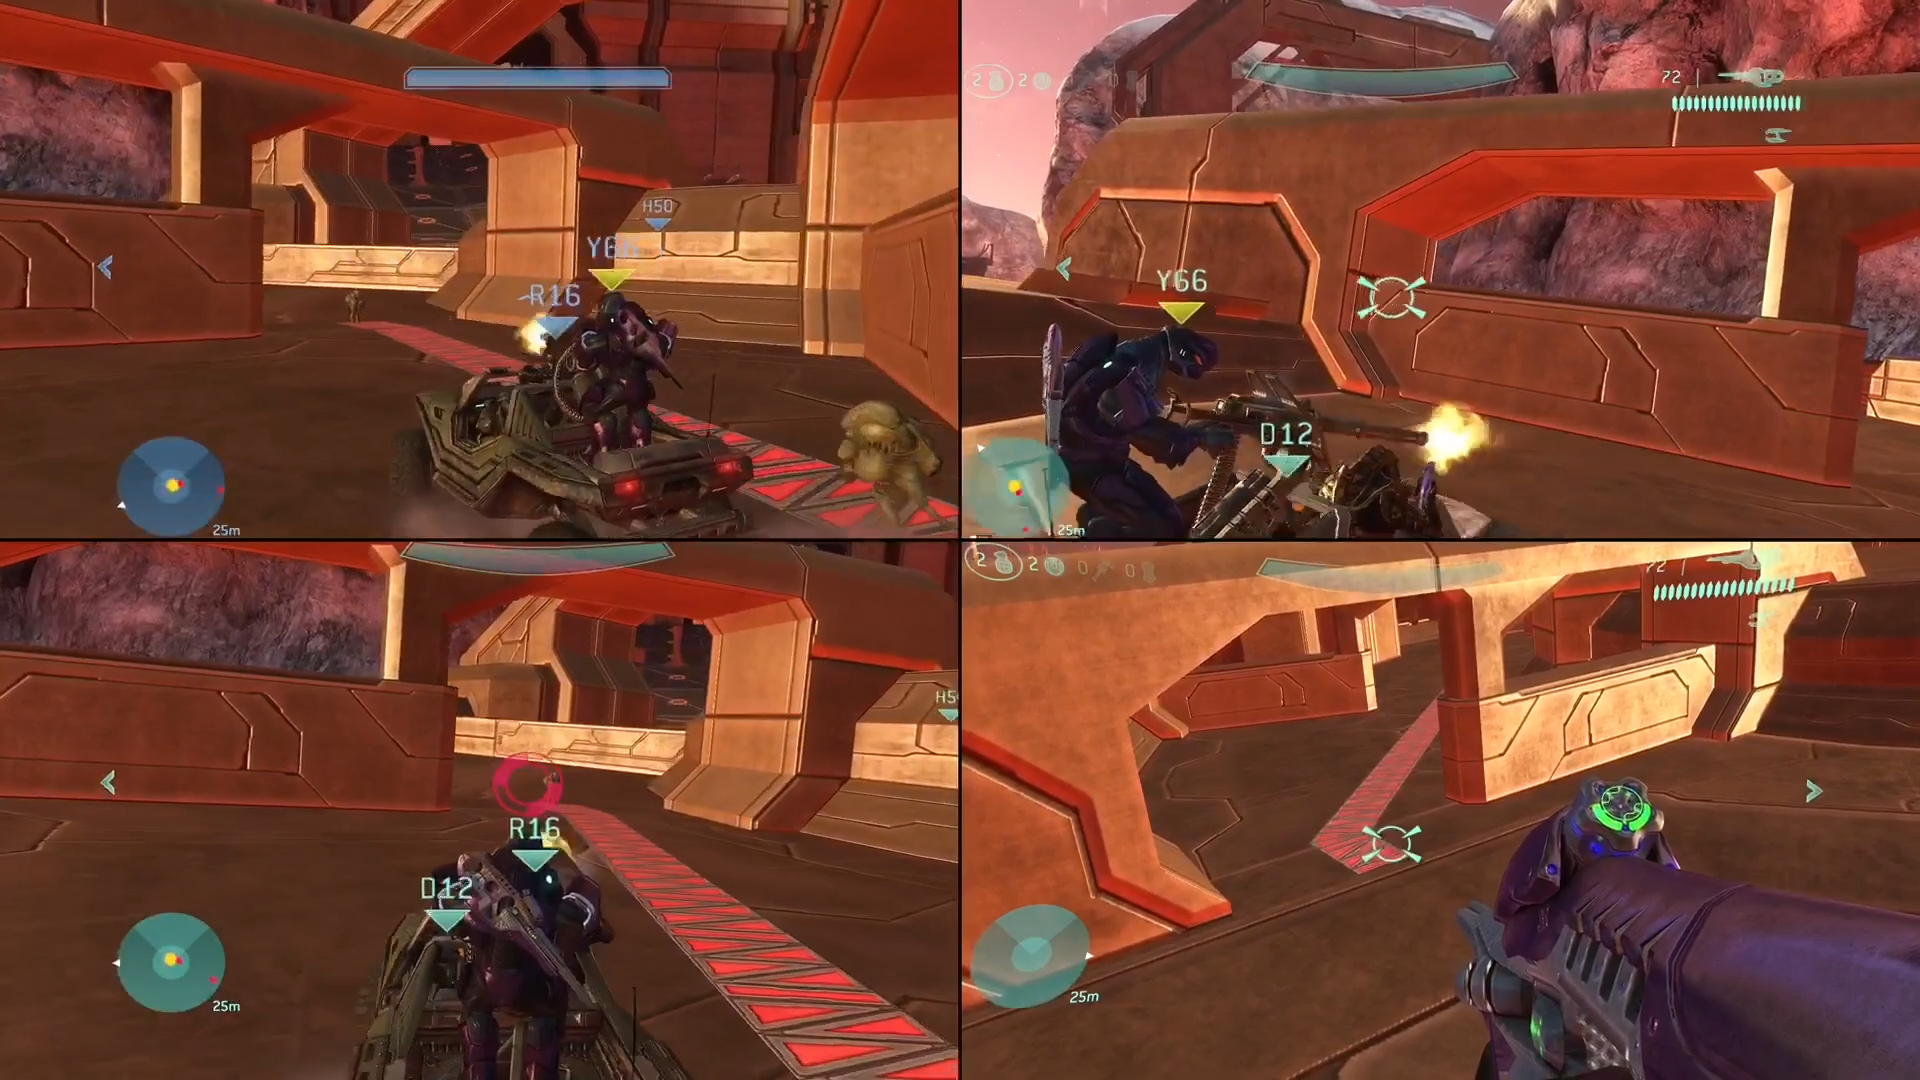 Halo 1 and 2 4 player Coop